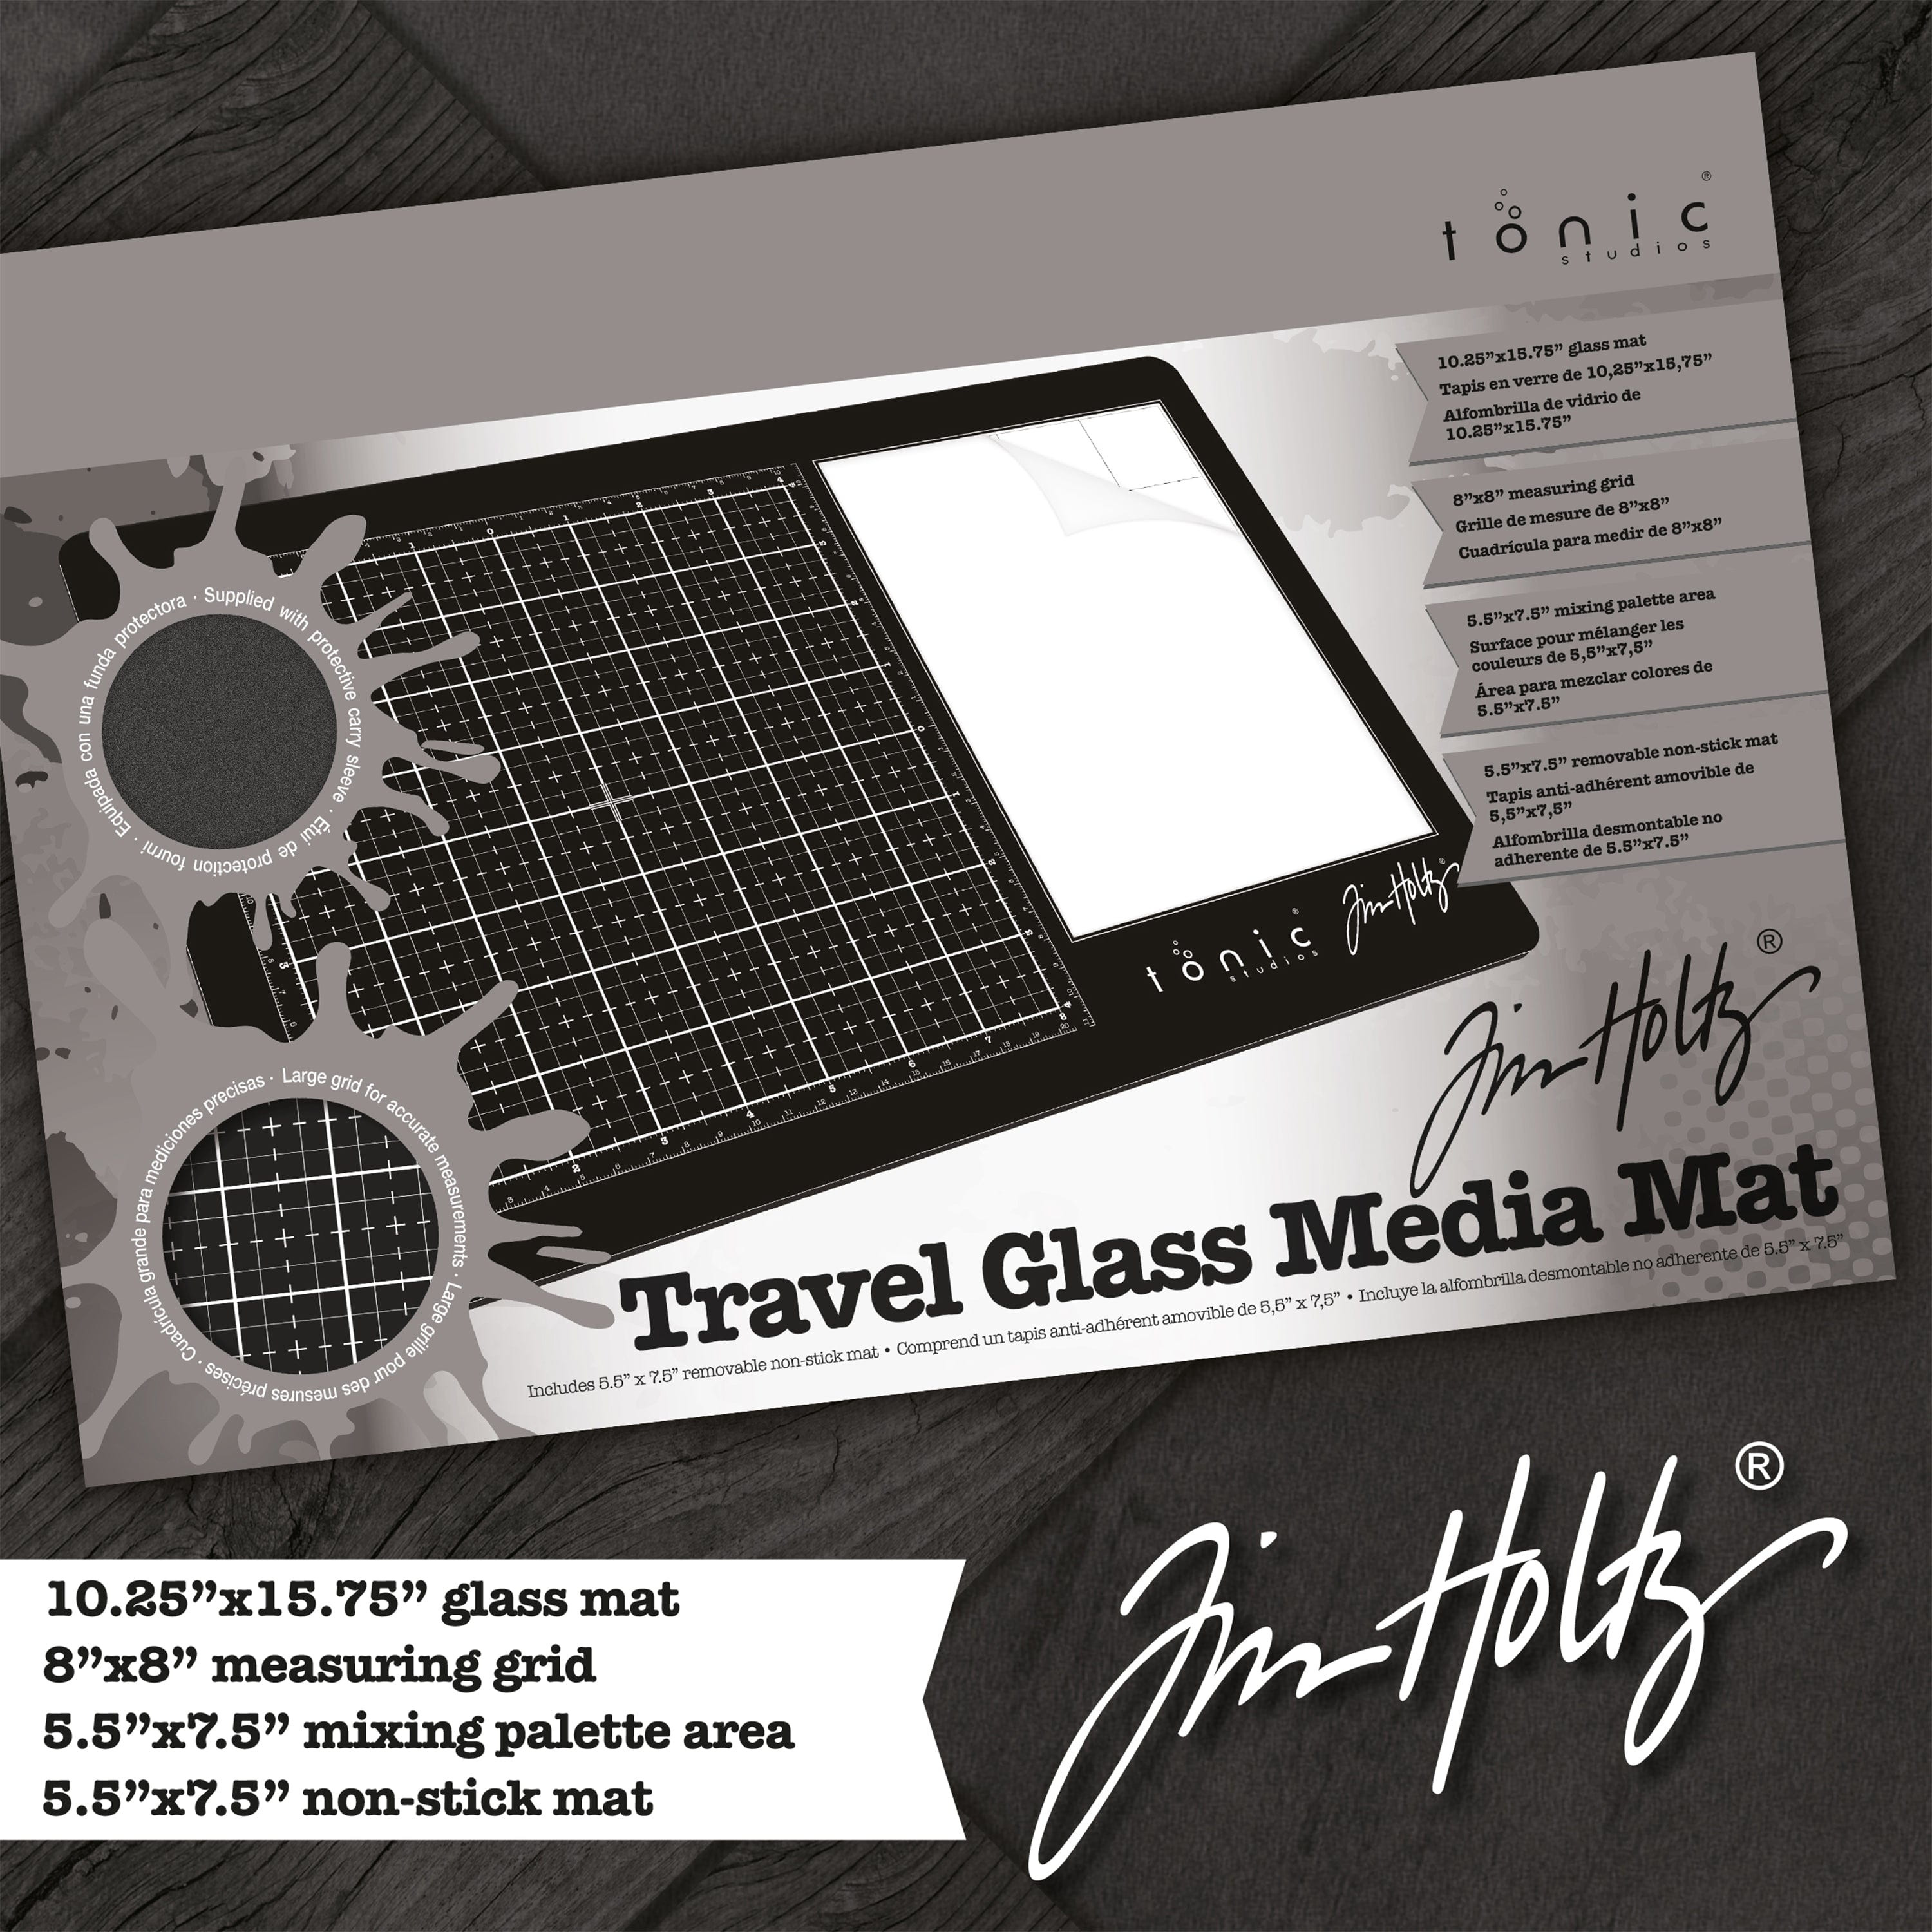 Clearly Amazing Multi-Use Mat - Light Grip - Transparent with Grid - Extra  Large - 3 pack 